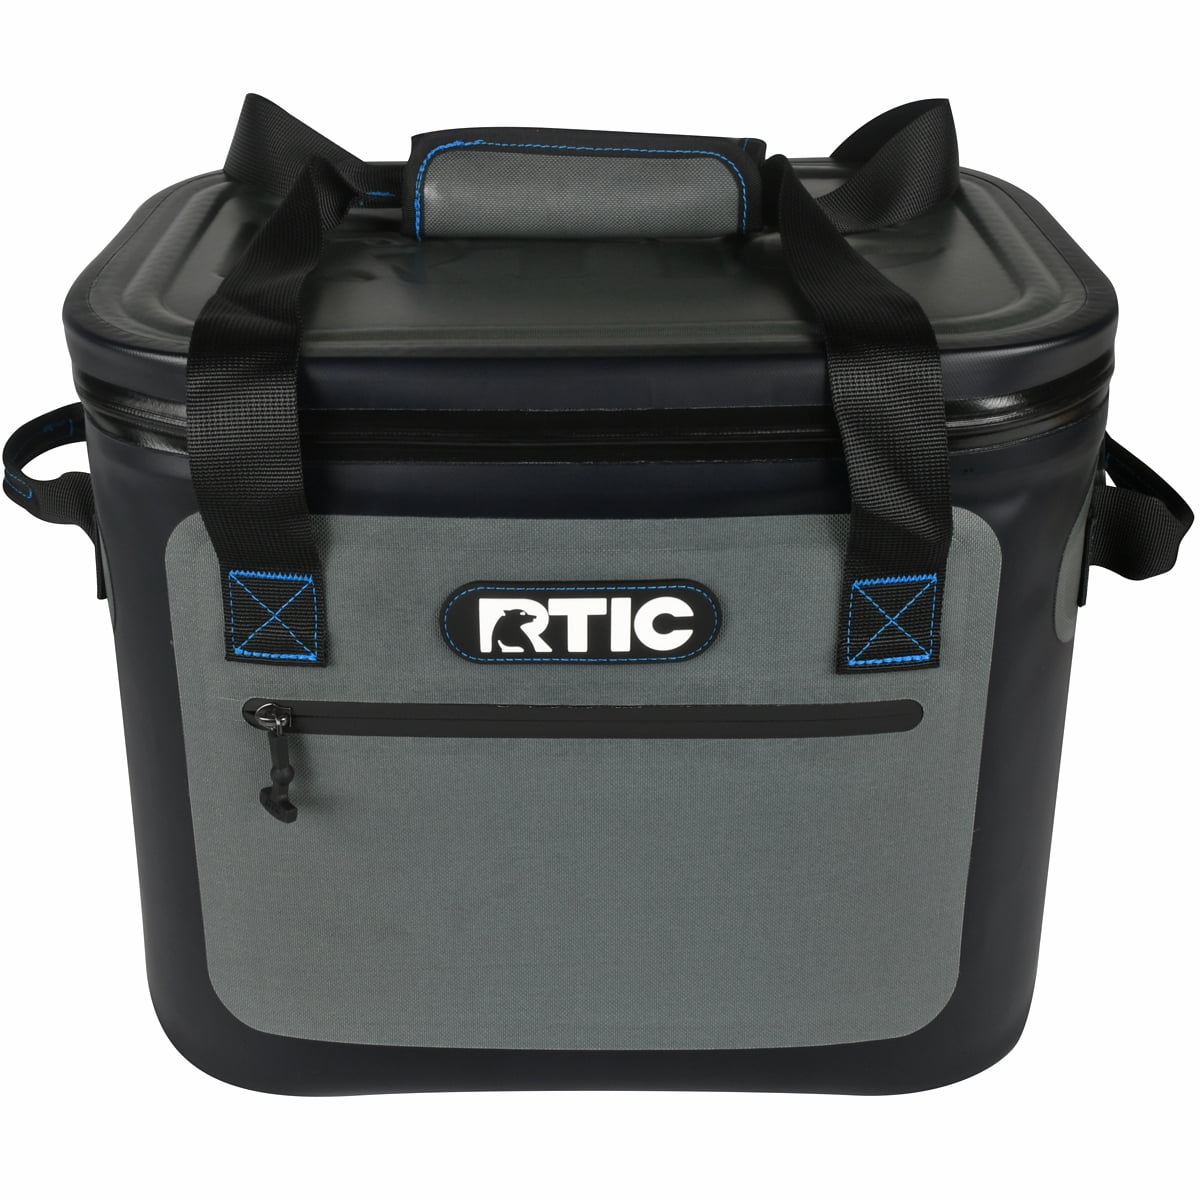 RTIC Soft Pack Insulated Cooler Bag - 30 Cans - Kanati Camo